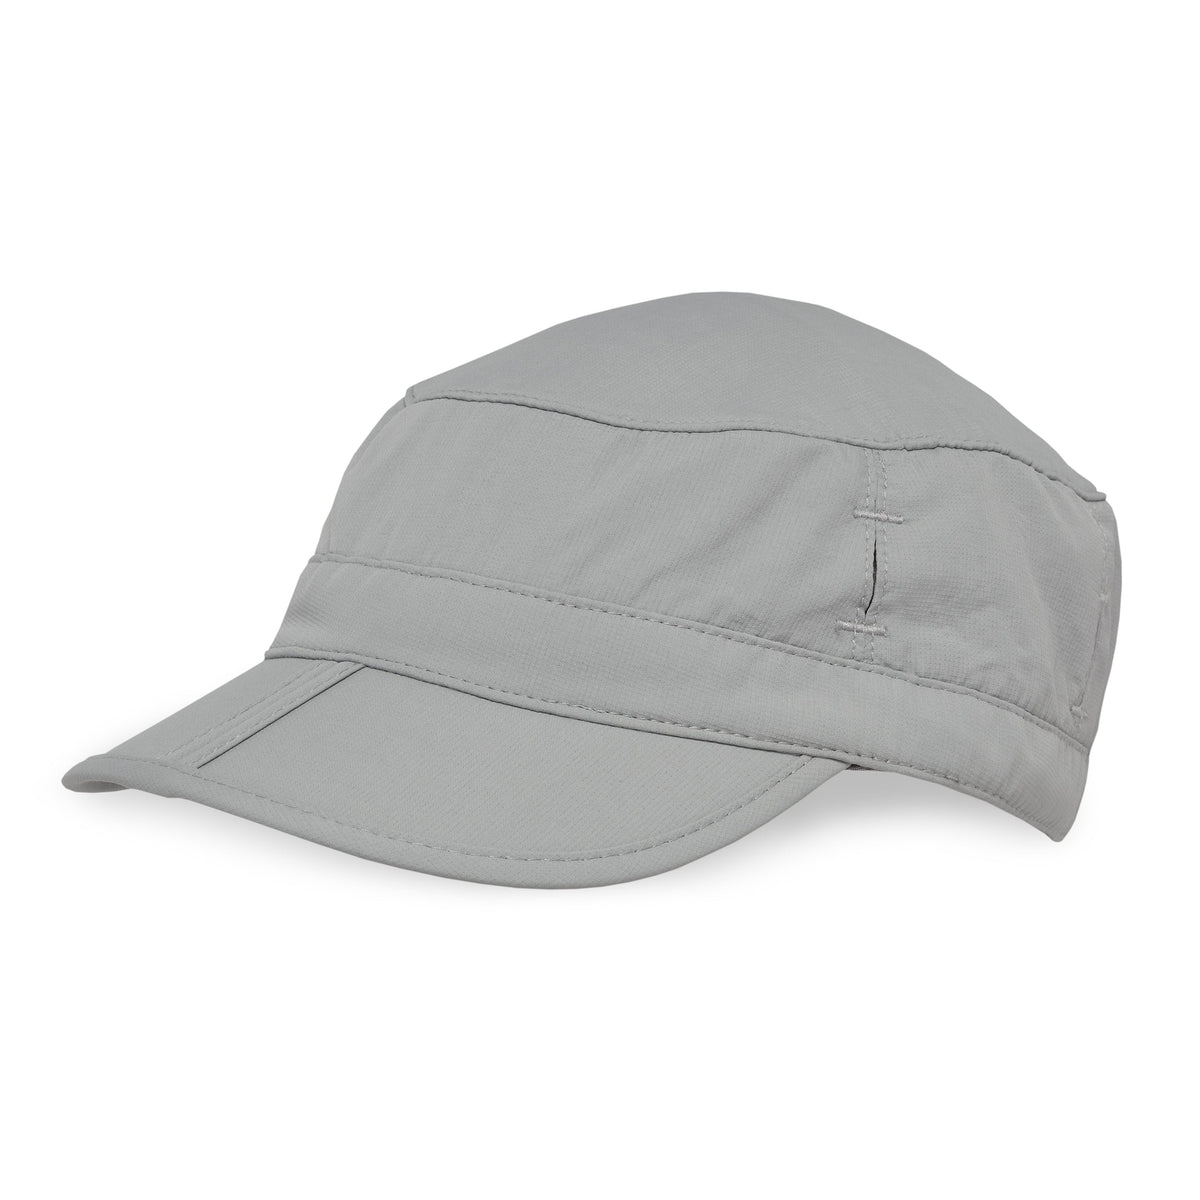 Tri-Fold Hat Folds Down Flat and Fits in Your Pocket